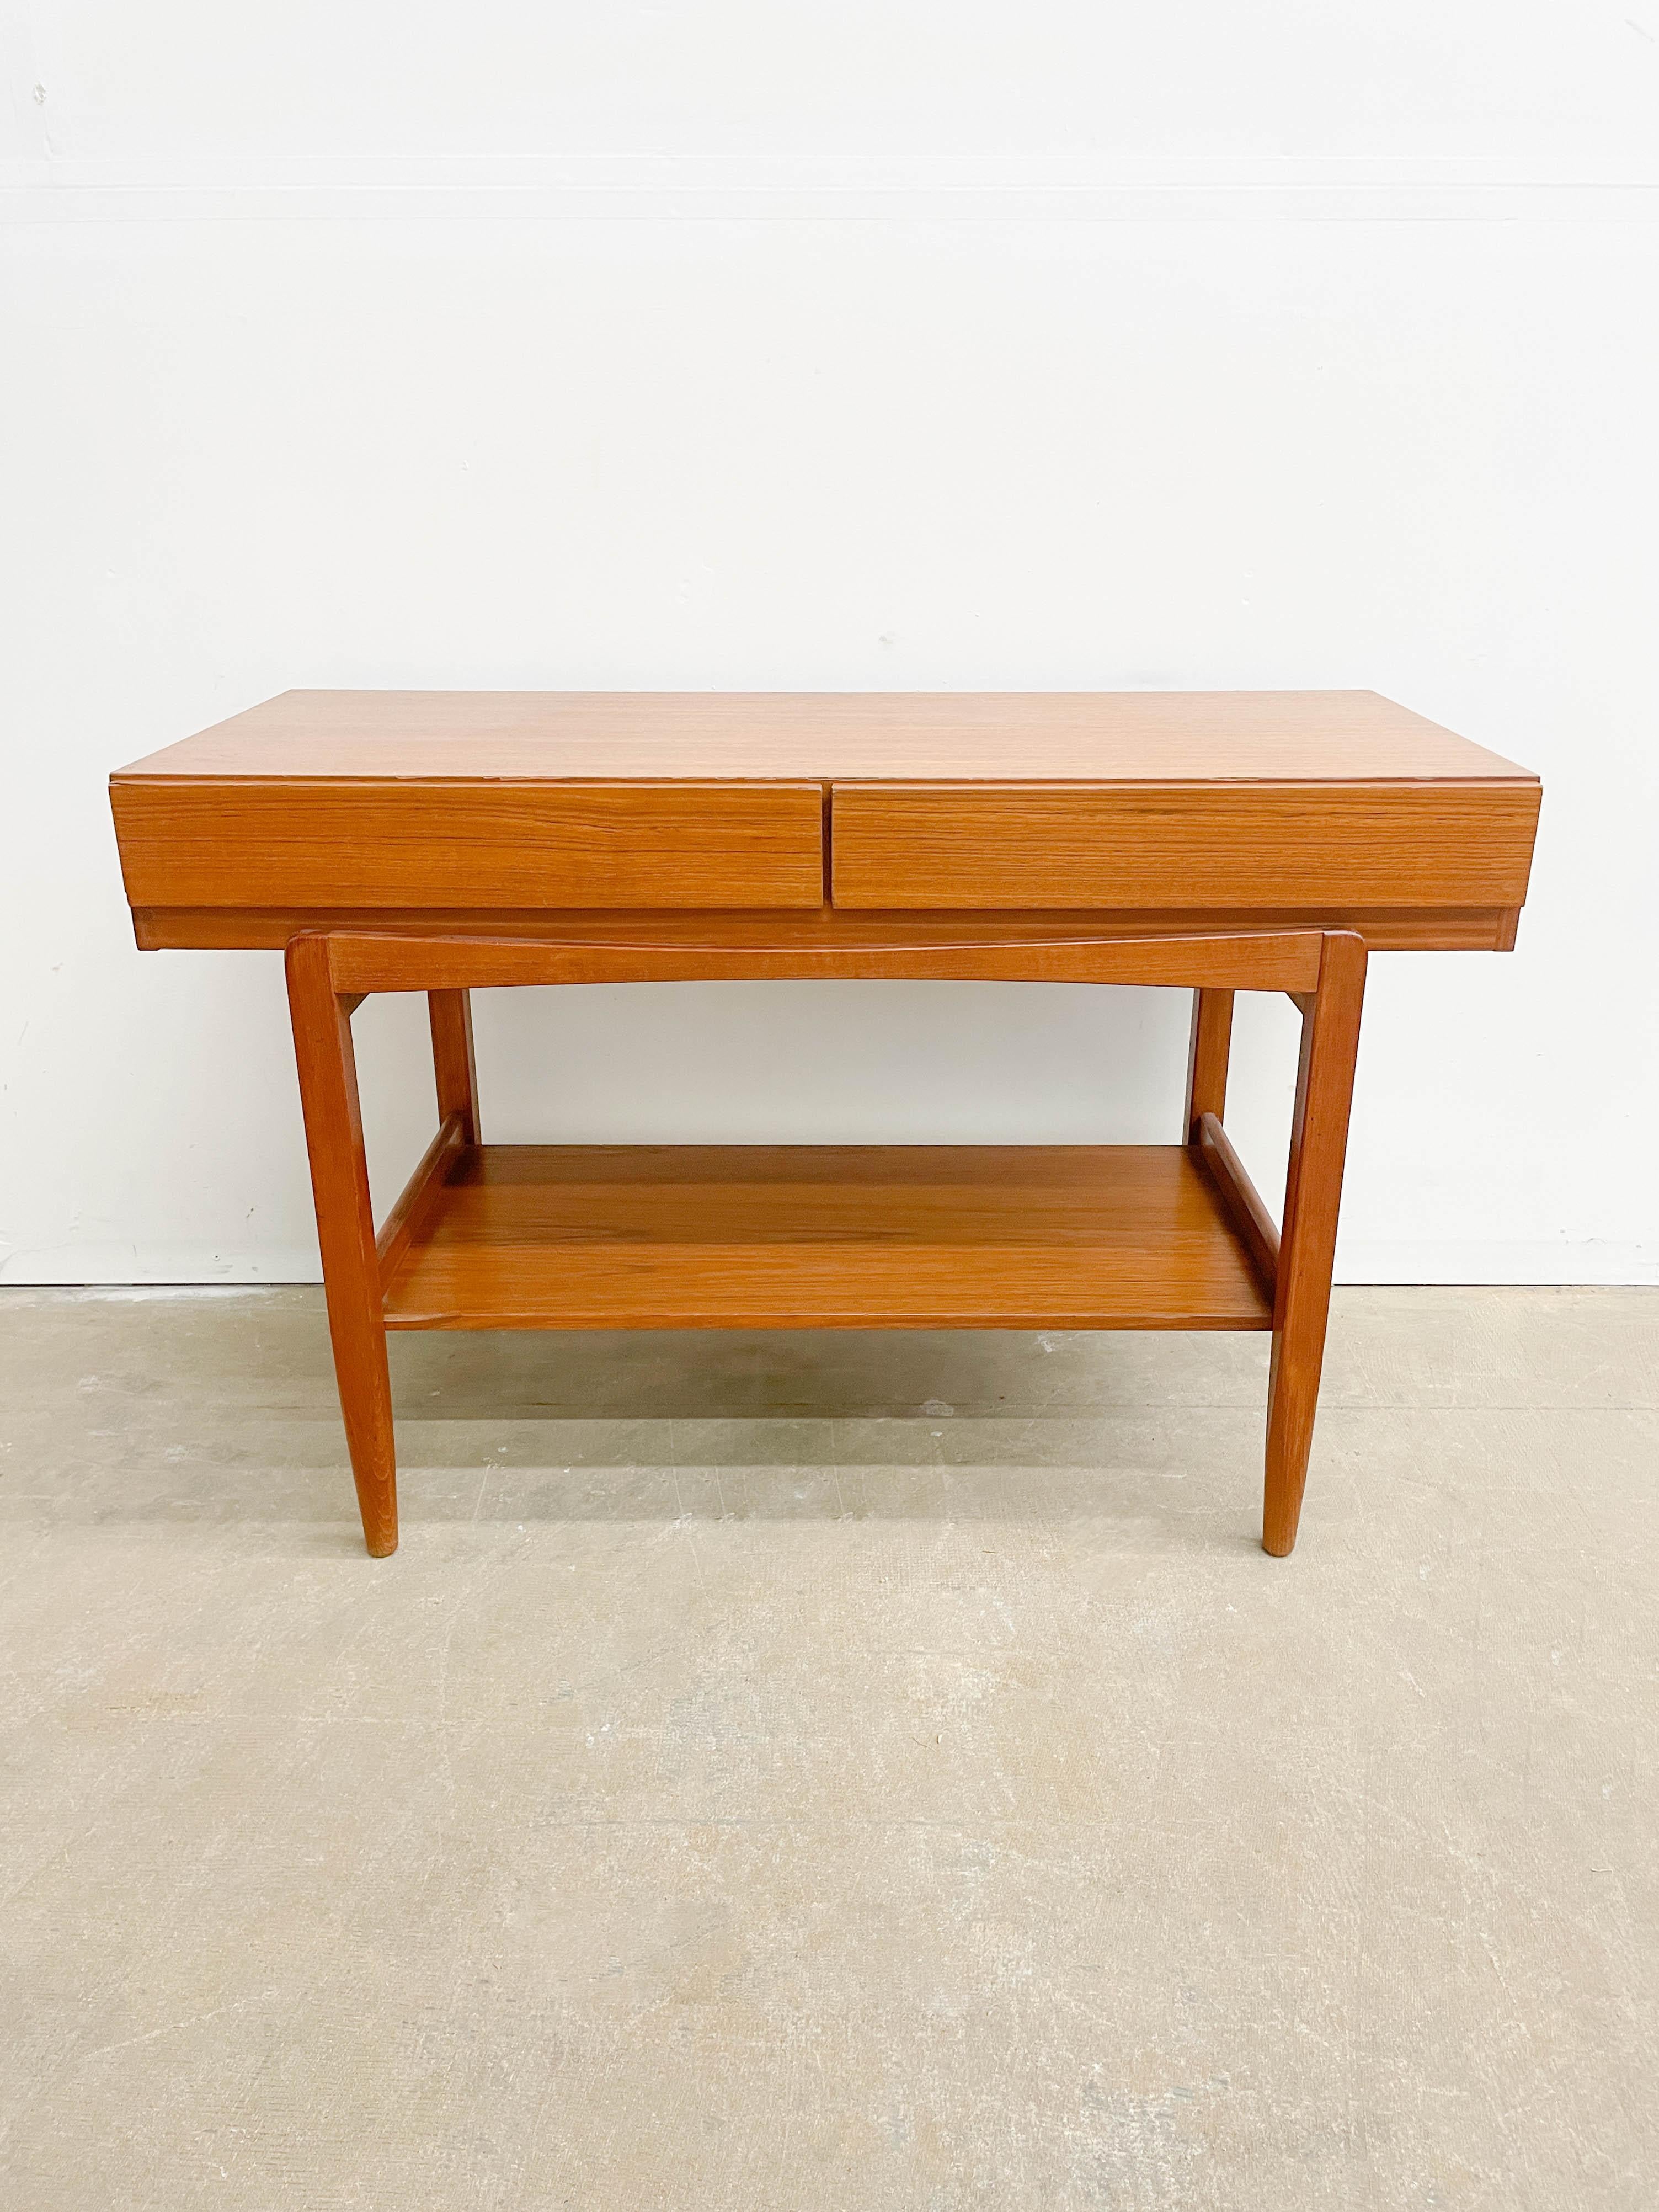 Elegant and practical, this console height table was designed by Ib Kofod Larsen for Faarup Mobelfabrik in the 1960s. Featuring an ample top surface, two large drawers and a lower shelf, it offers excellent storage options for an entry hall, bedroom